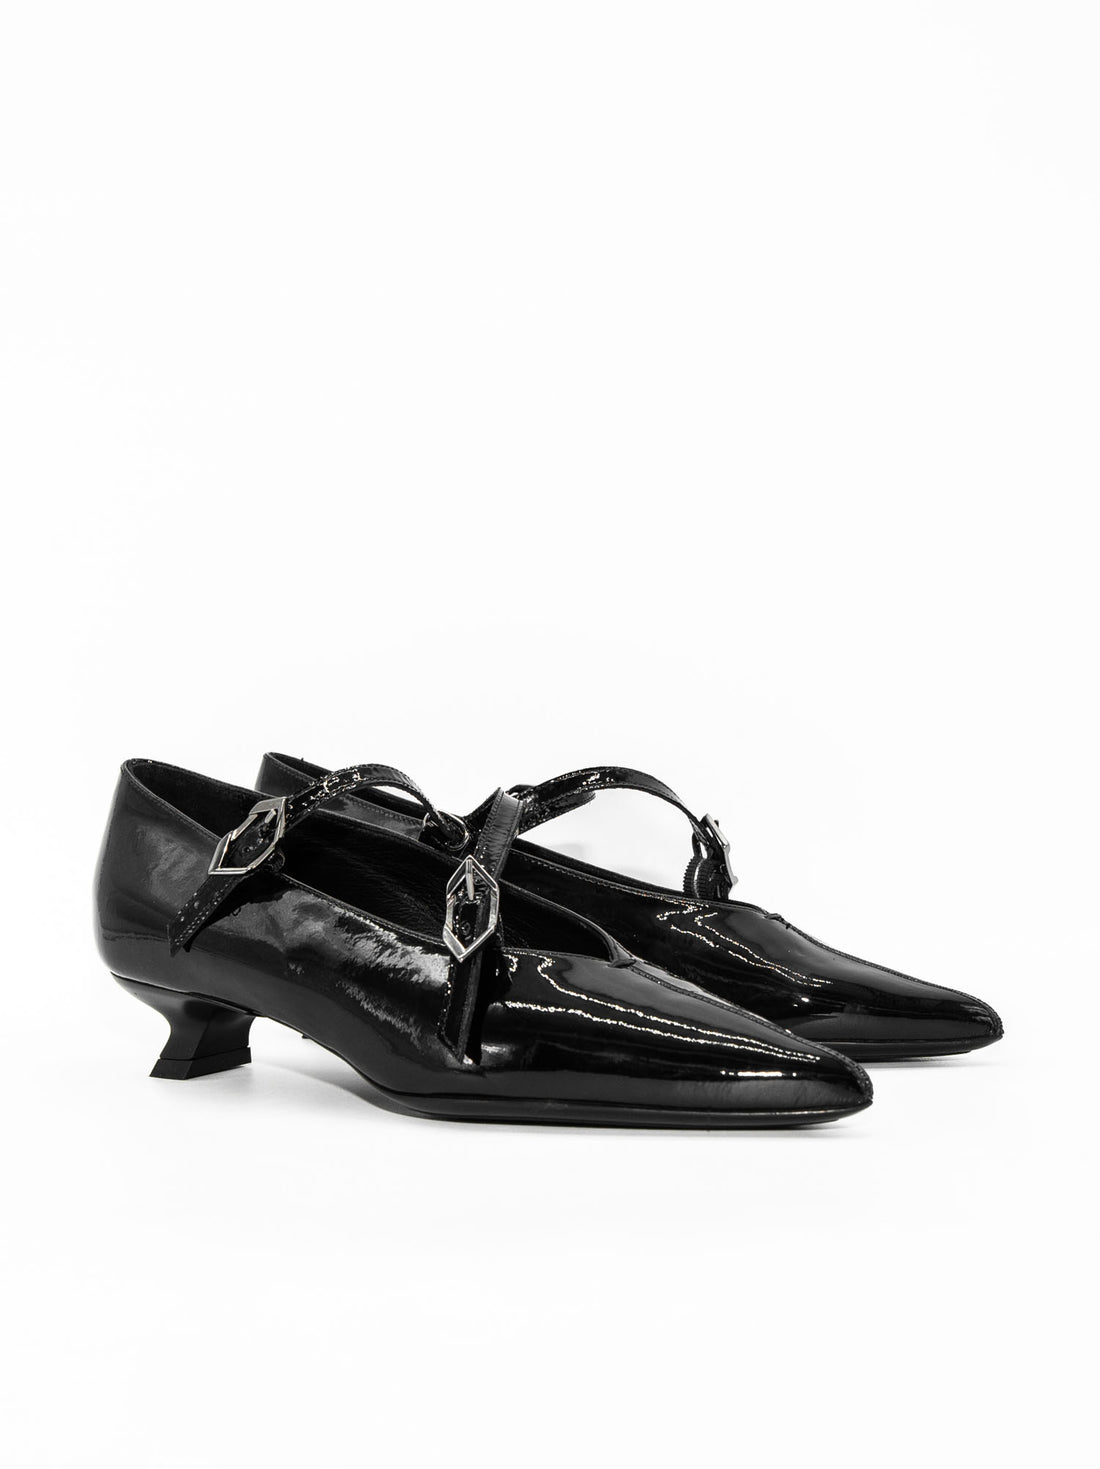 FT24 PATENT LEATHER HEEL SHOES